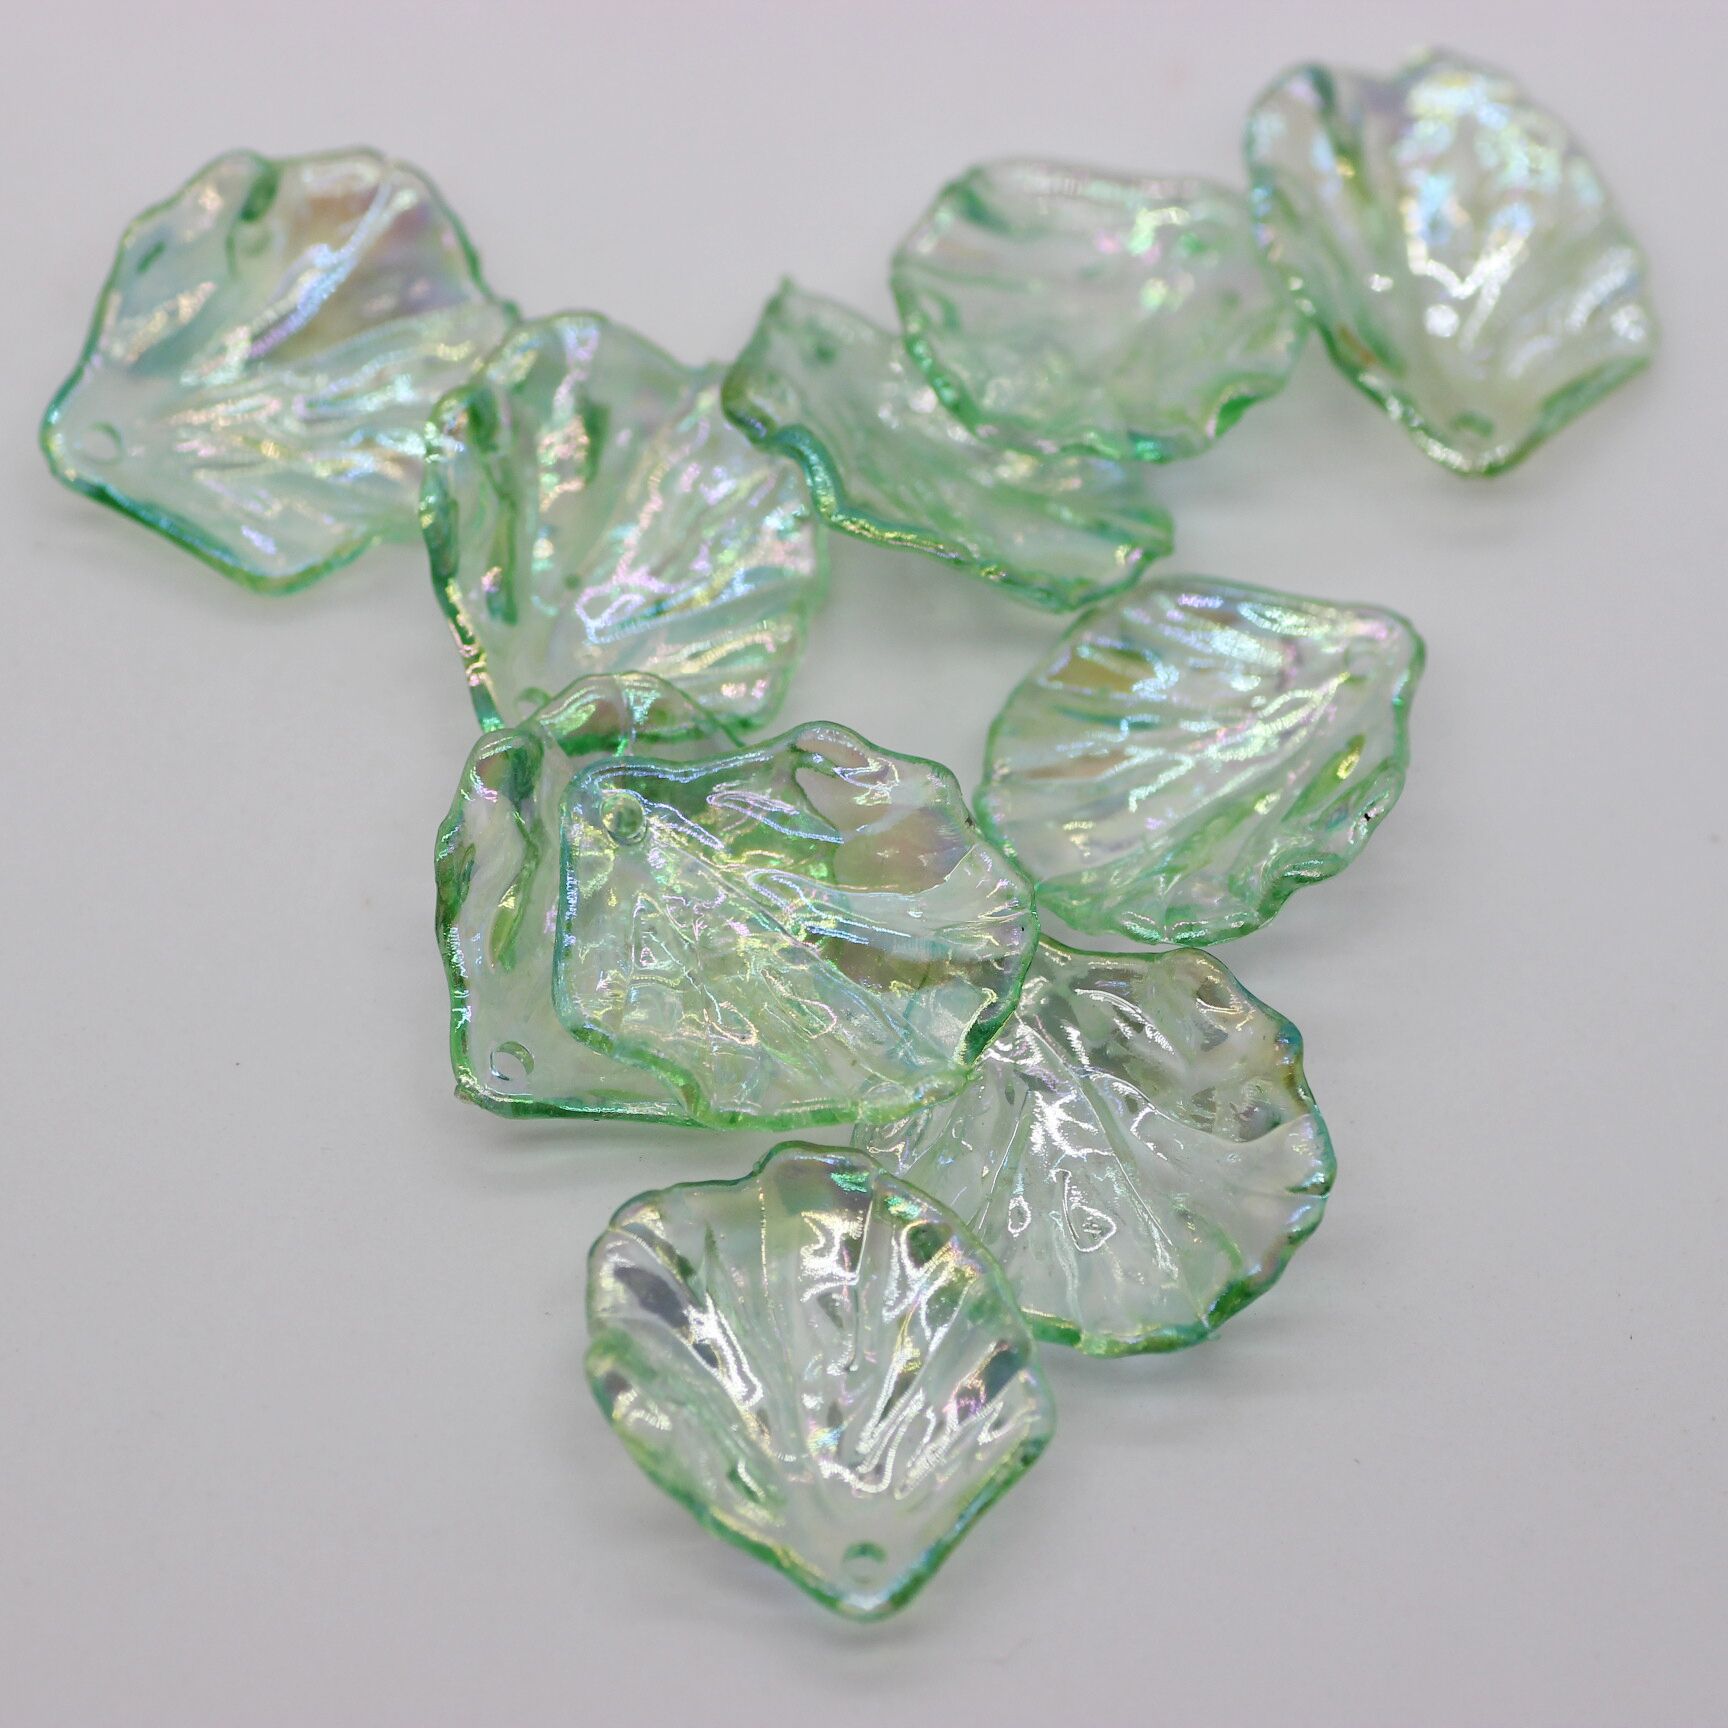 Small 15 x 17 mm clear green